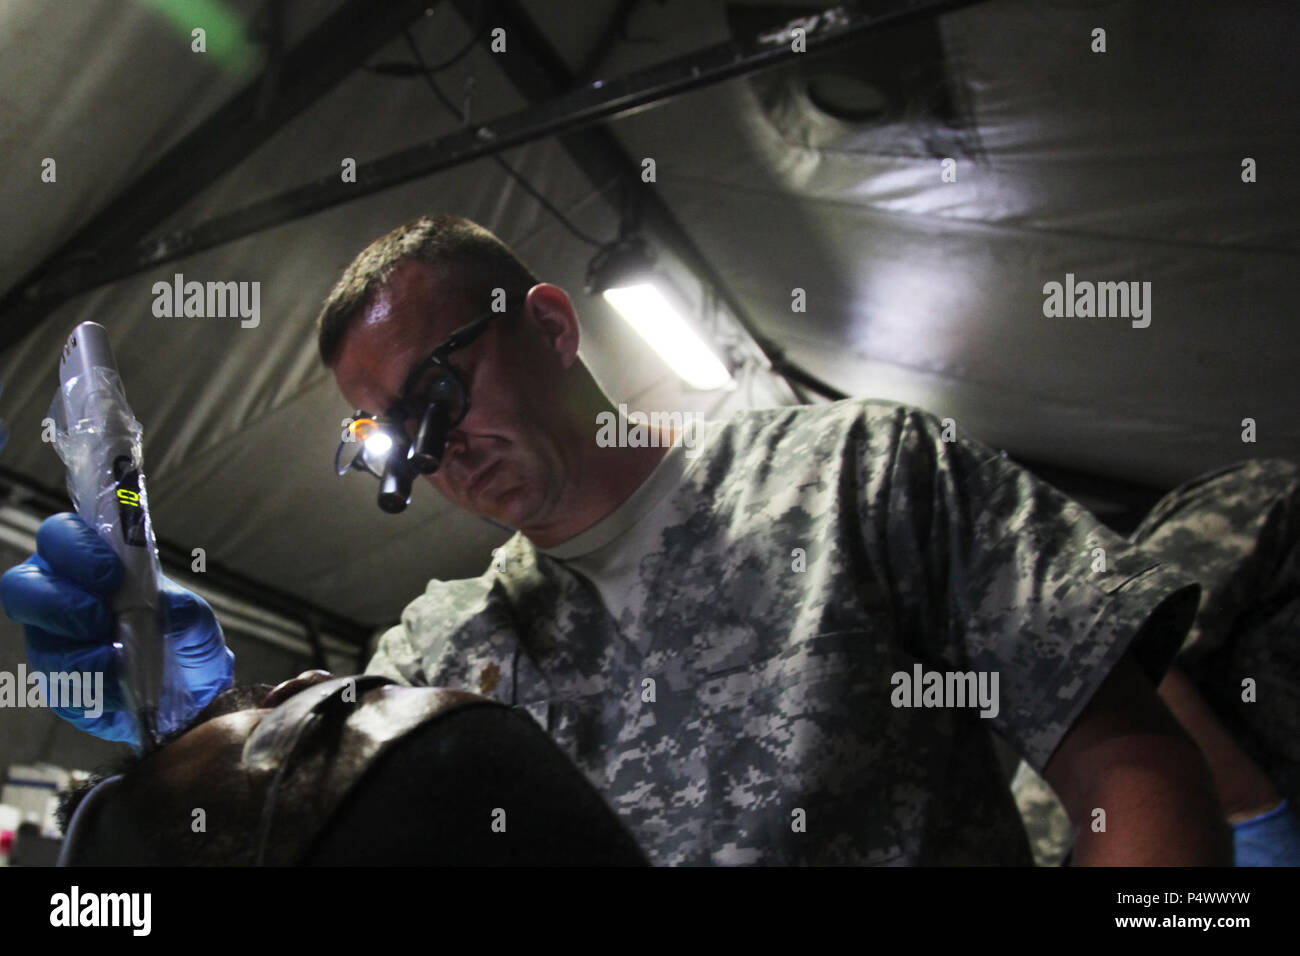 U.S. Army Maj. Aaron Taff, attached to the Wyoming National Guard Medical Detachment, seals a filling during a medical readiness event held in San Ignacio, Belize, May 08, 2017. This is the second of three medical events that are scheduled to take place during Beyond the Horizon 2017. BTH 2017 is a U.S. Southern Command-sponsored, Army South-led exercise designed to provide humanitarian and engineering services to communities in need, demonstrating U.S. support for Belize. Stock Photo